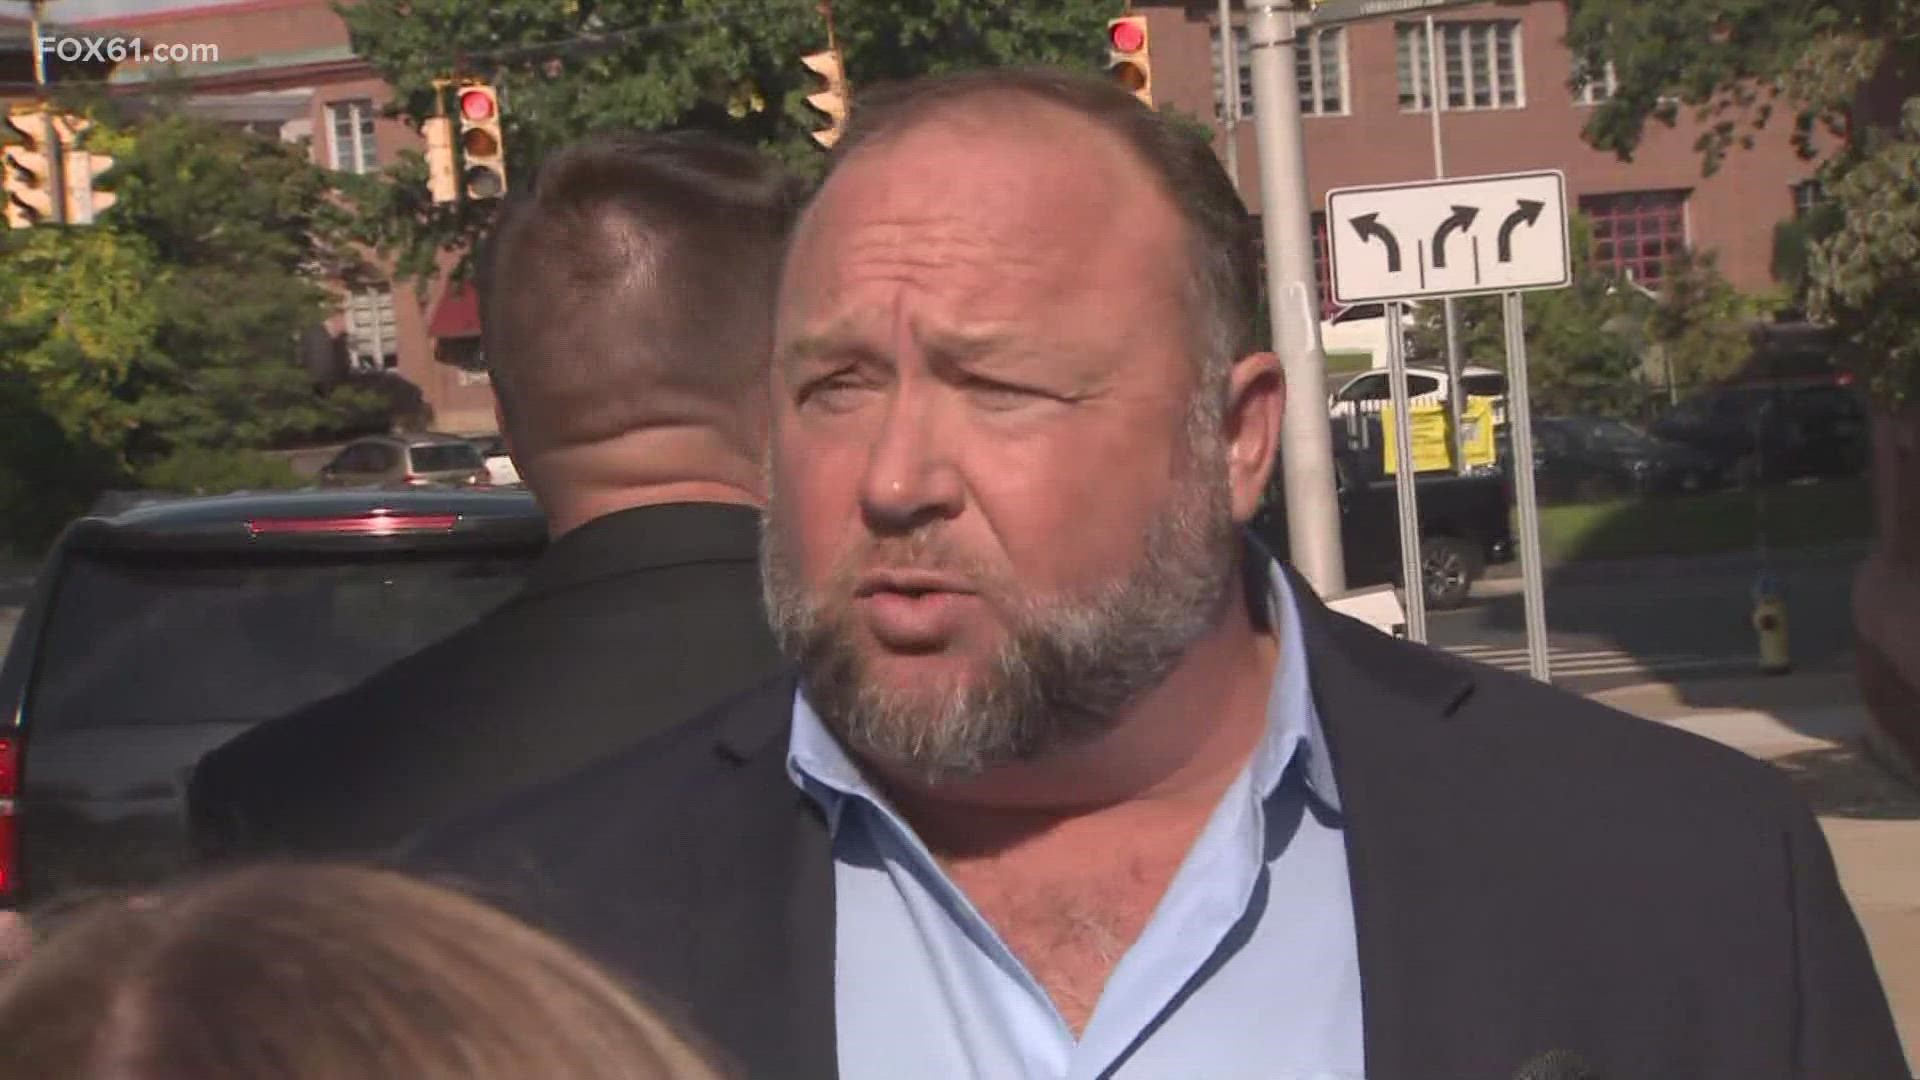 Alex Jones said he was asked to come to Waterbury court on Tuesday but that he will not be testifying today and may be asked to testify the following week.